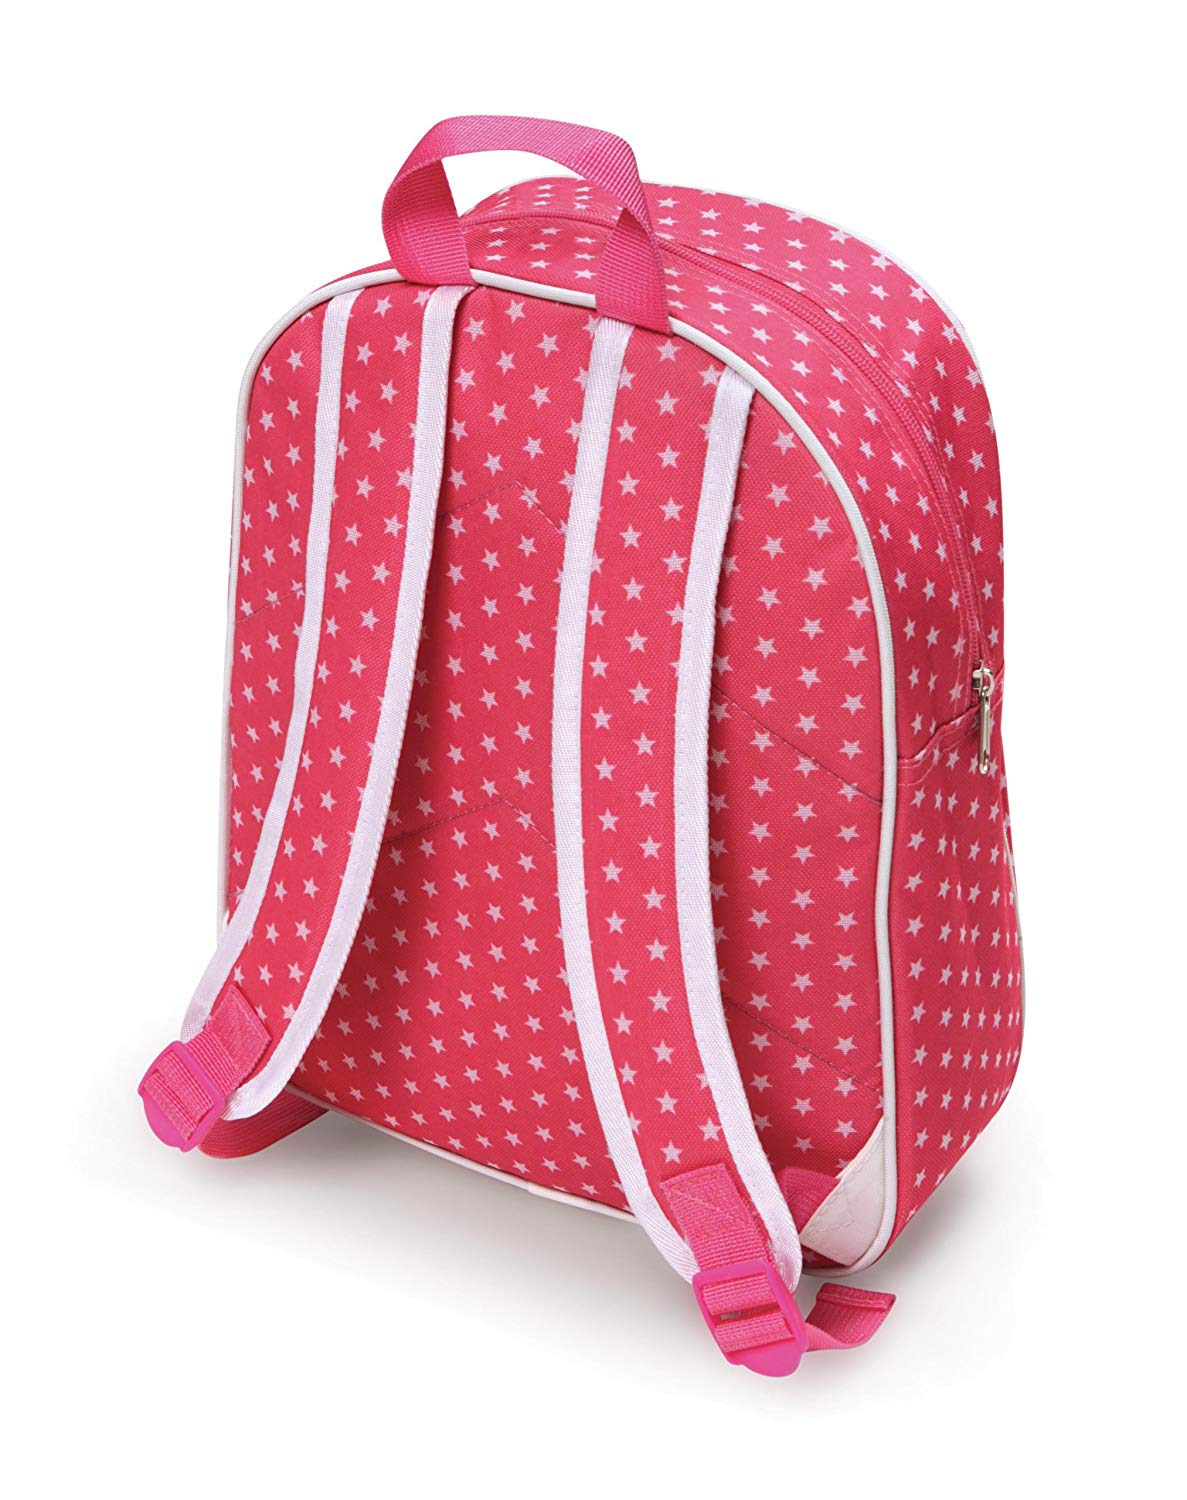 Badger Basket Doll Travel Backpack - Pink/Star - Fits American Girl, My Life As & Most 18 inch Dolls - image 3 of 6